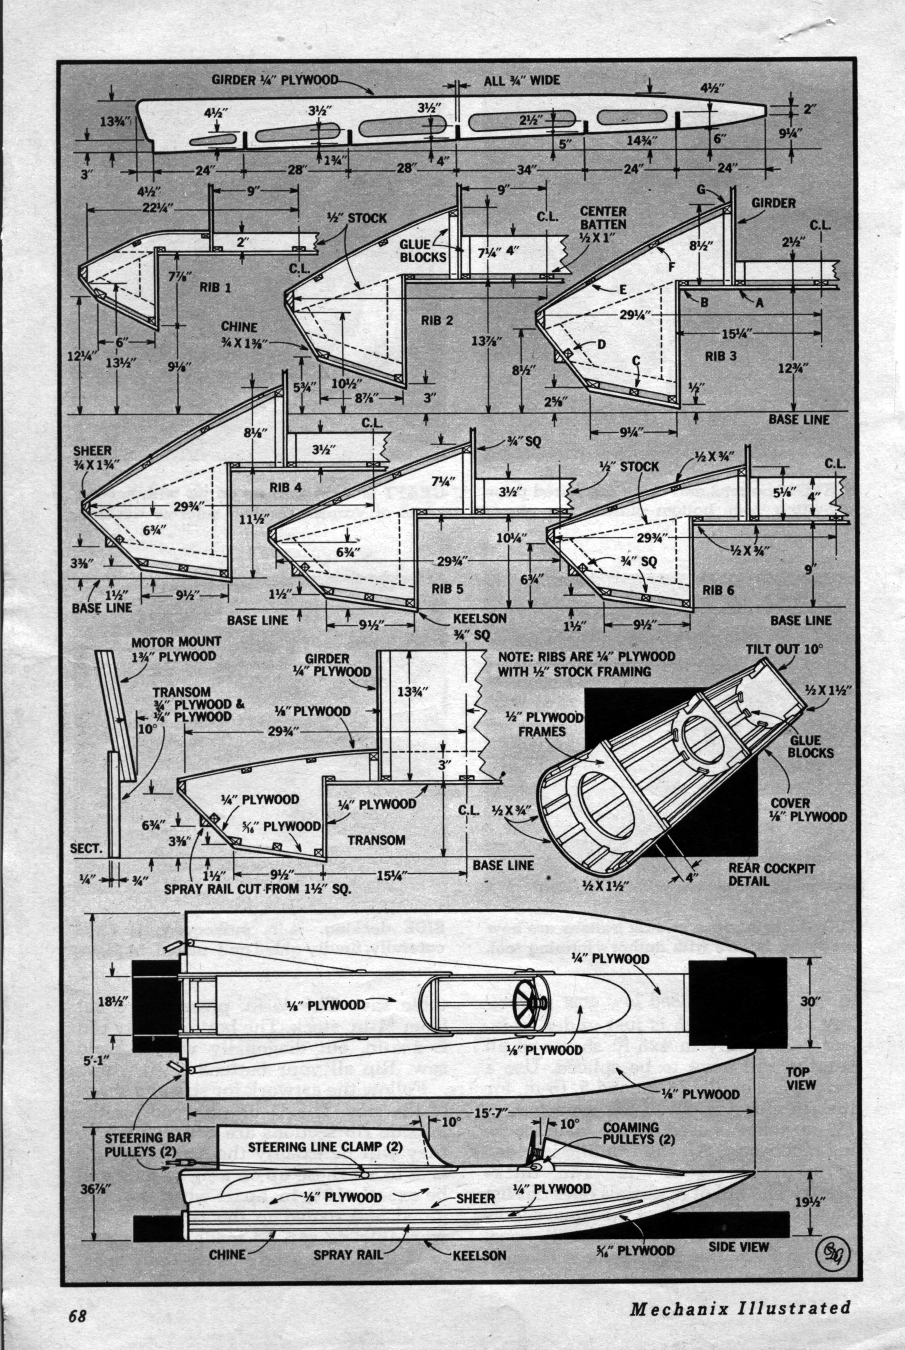 www.svensons.com - Free Boat Plans From "Science and Mechanics ...